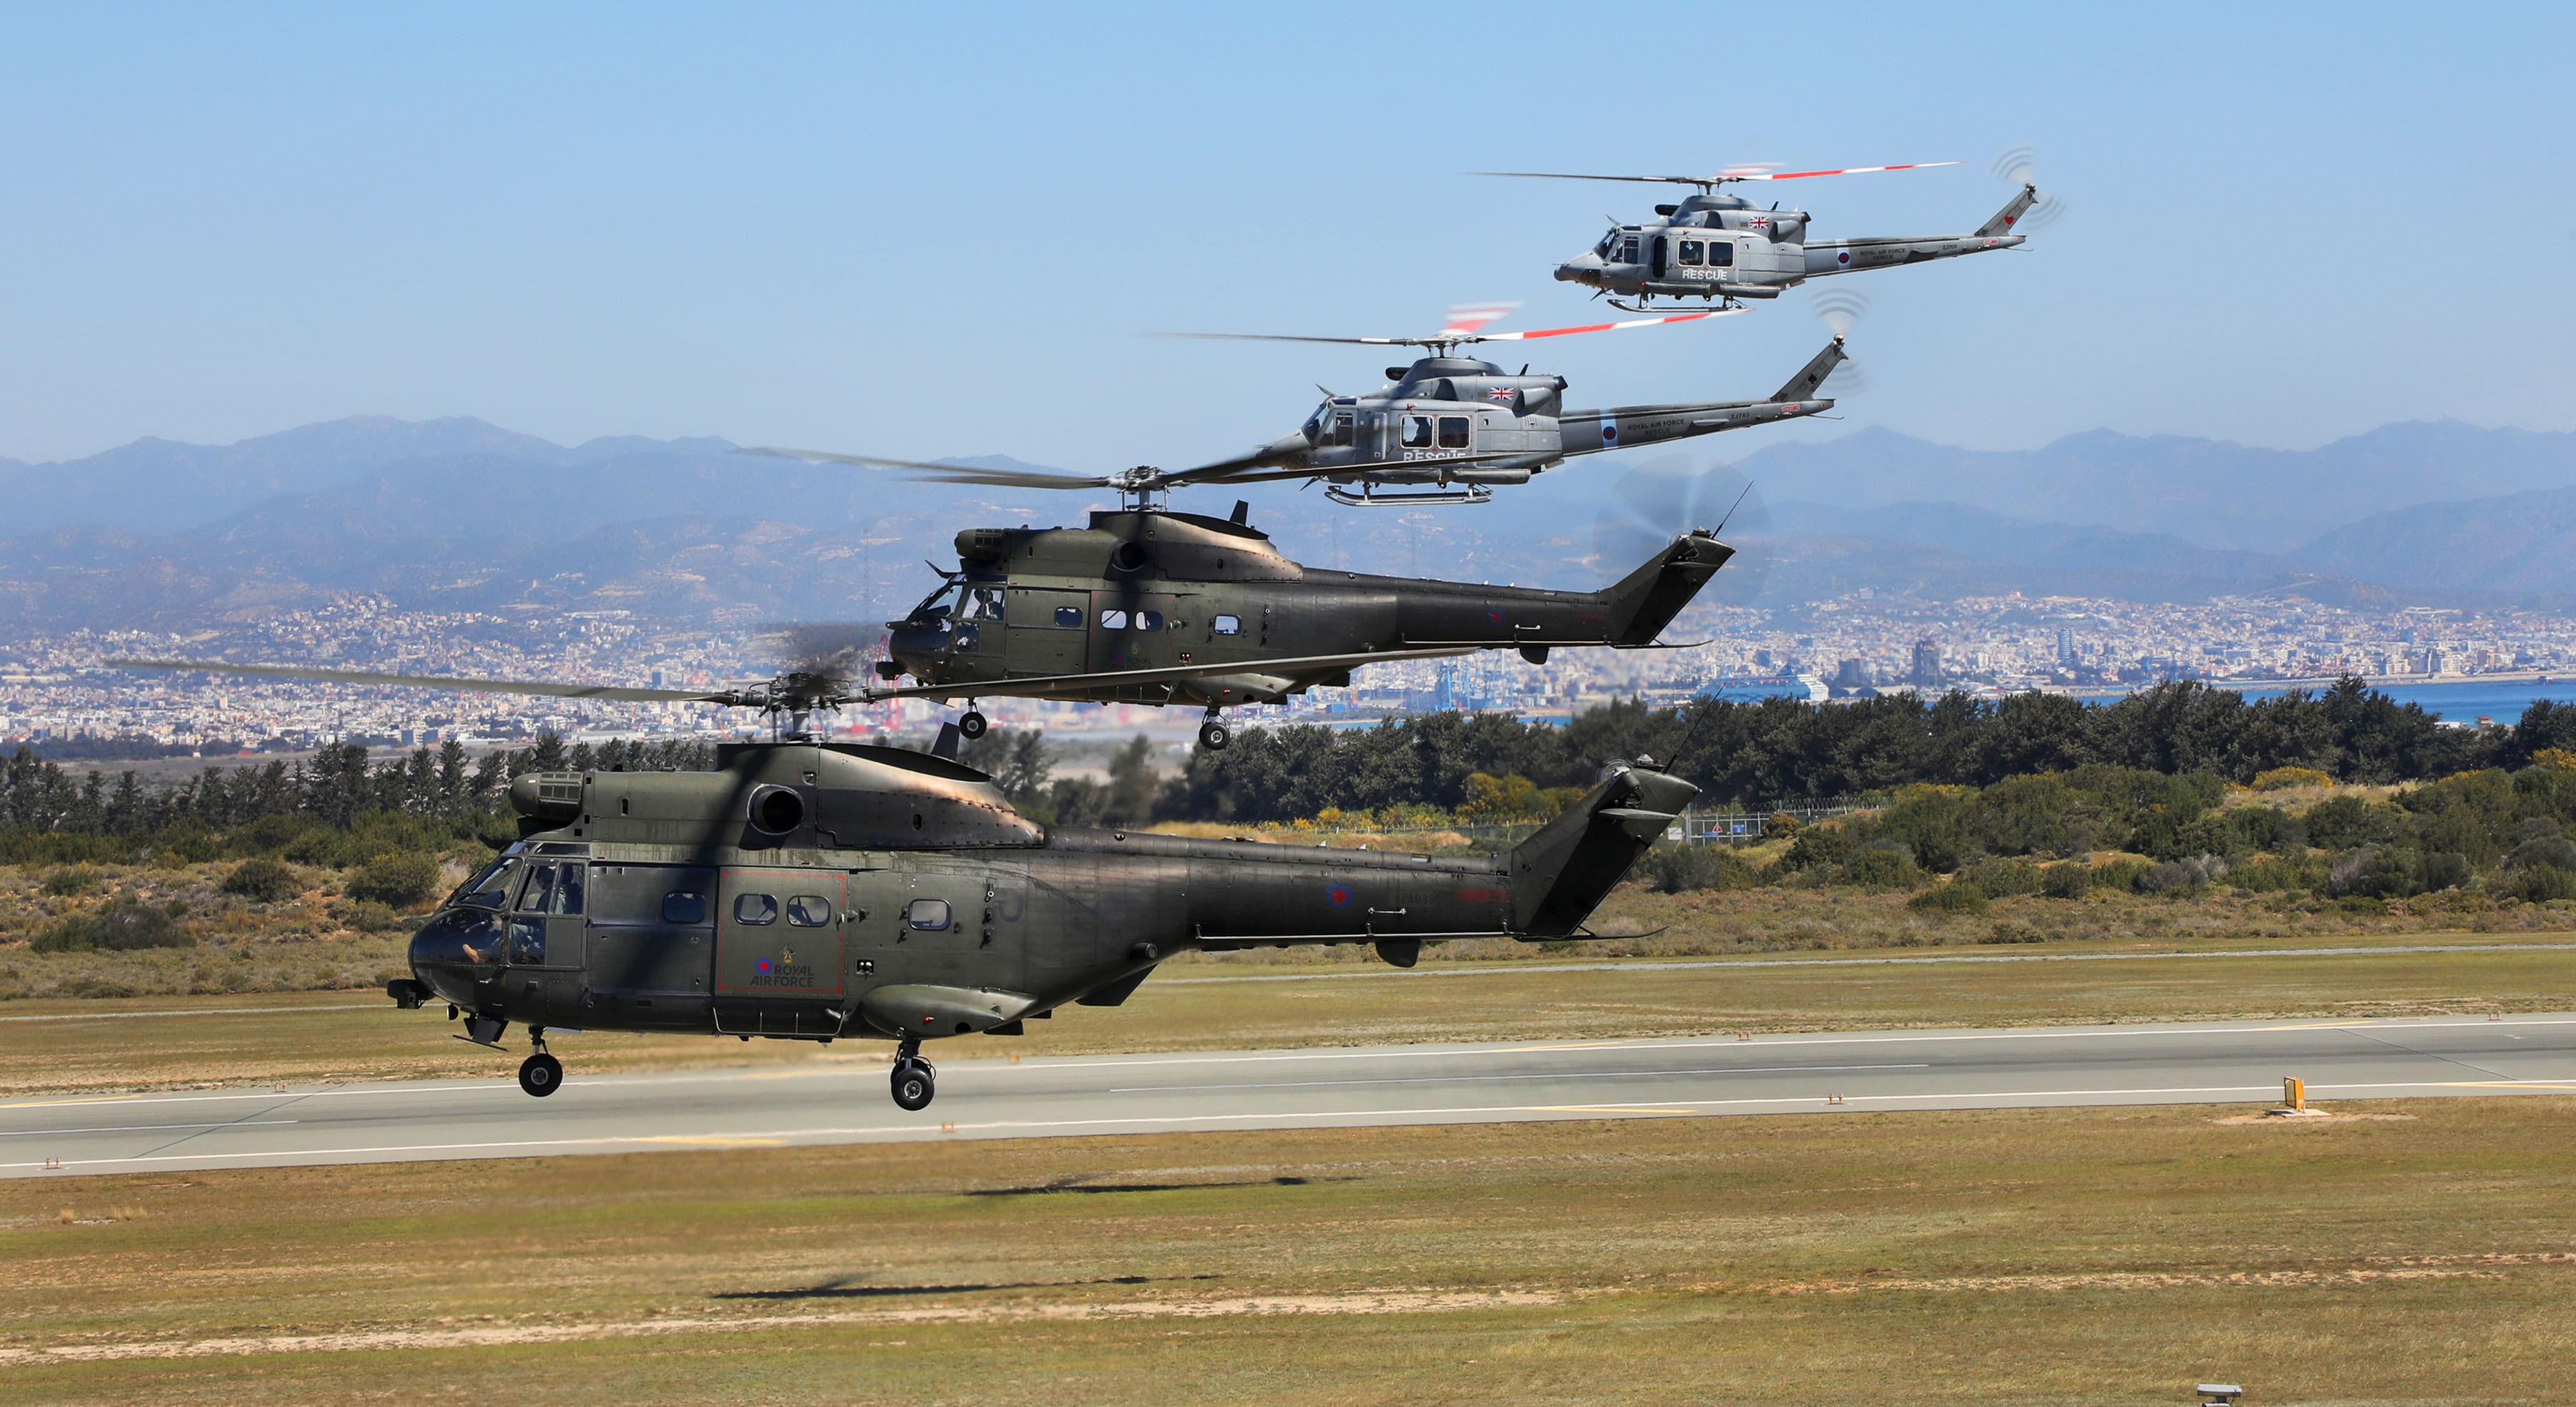 Image shows RAF Puma and Griffin helicopters in flight over the airfield runway.